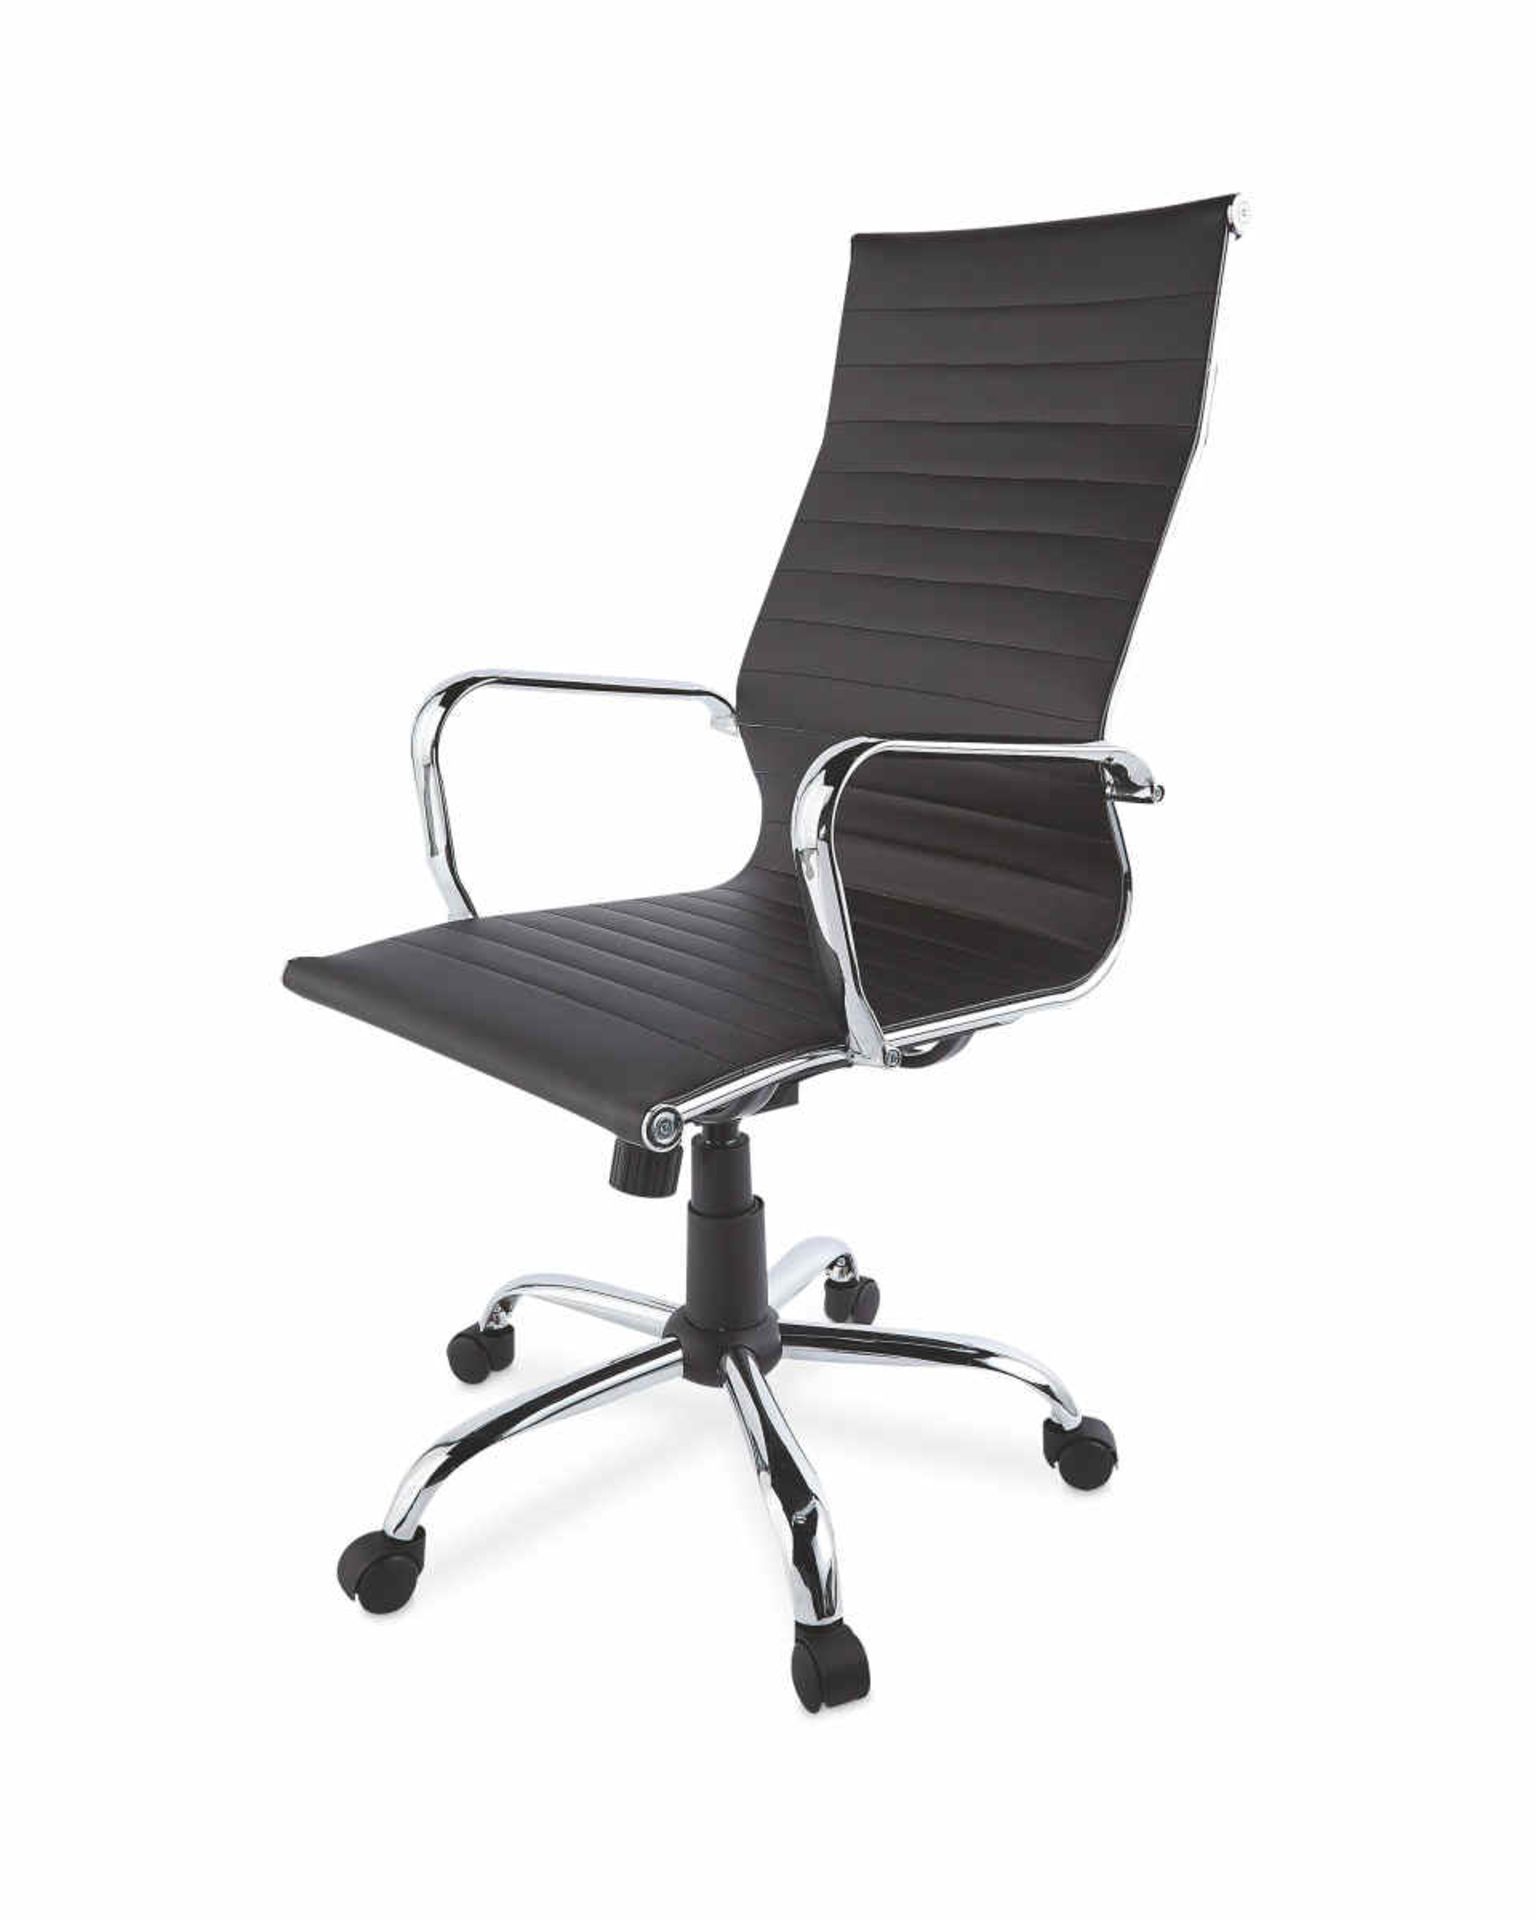 Kirkton House High Back Desk Chair. Ensure you have a chair that keeps you comfortable and supported